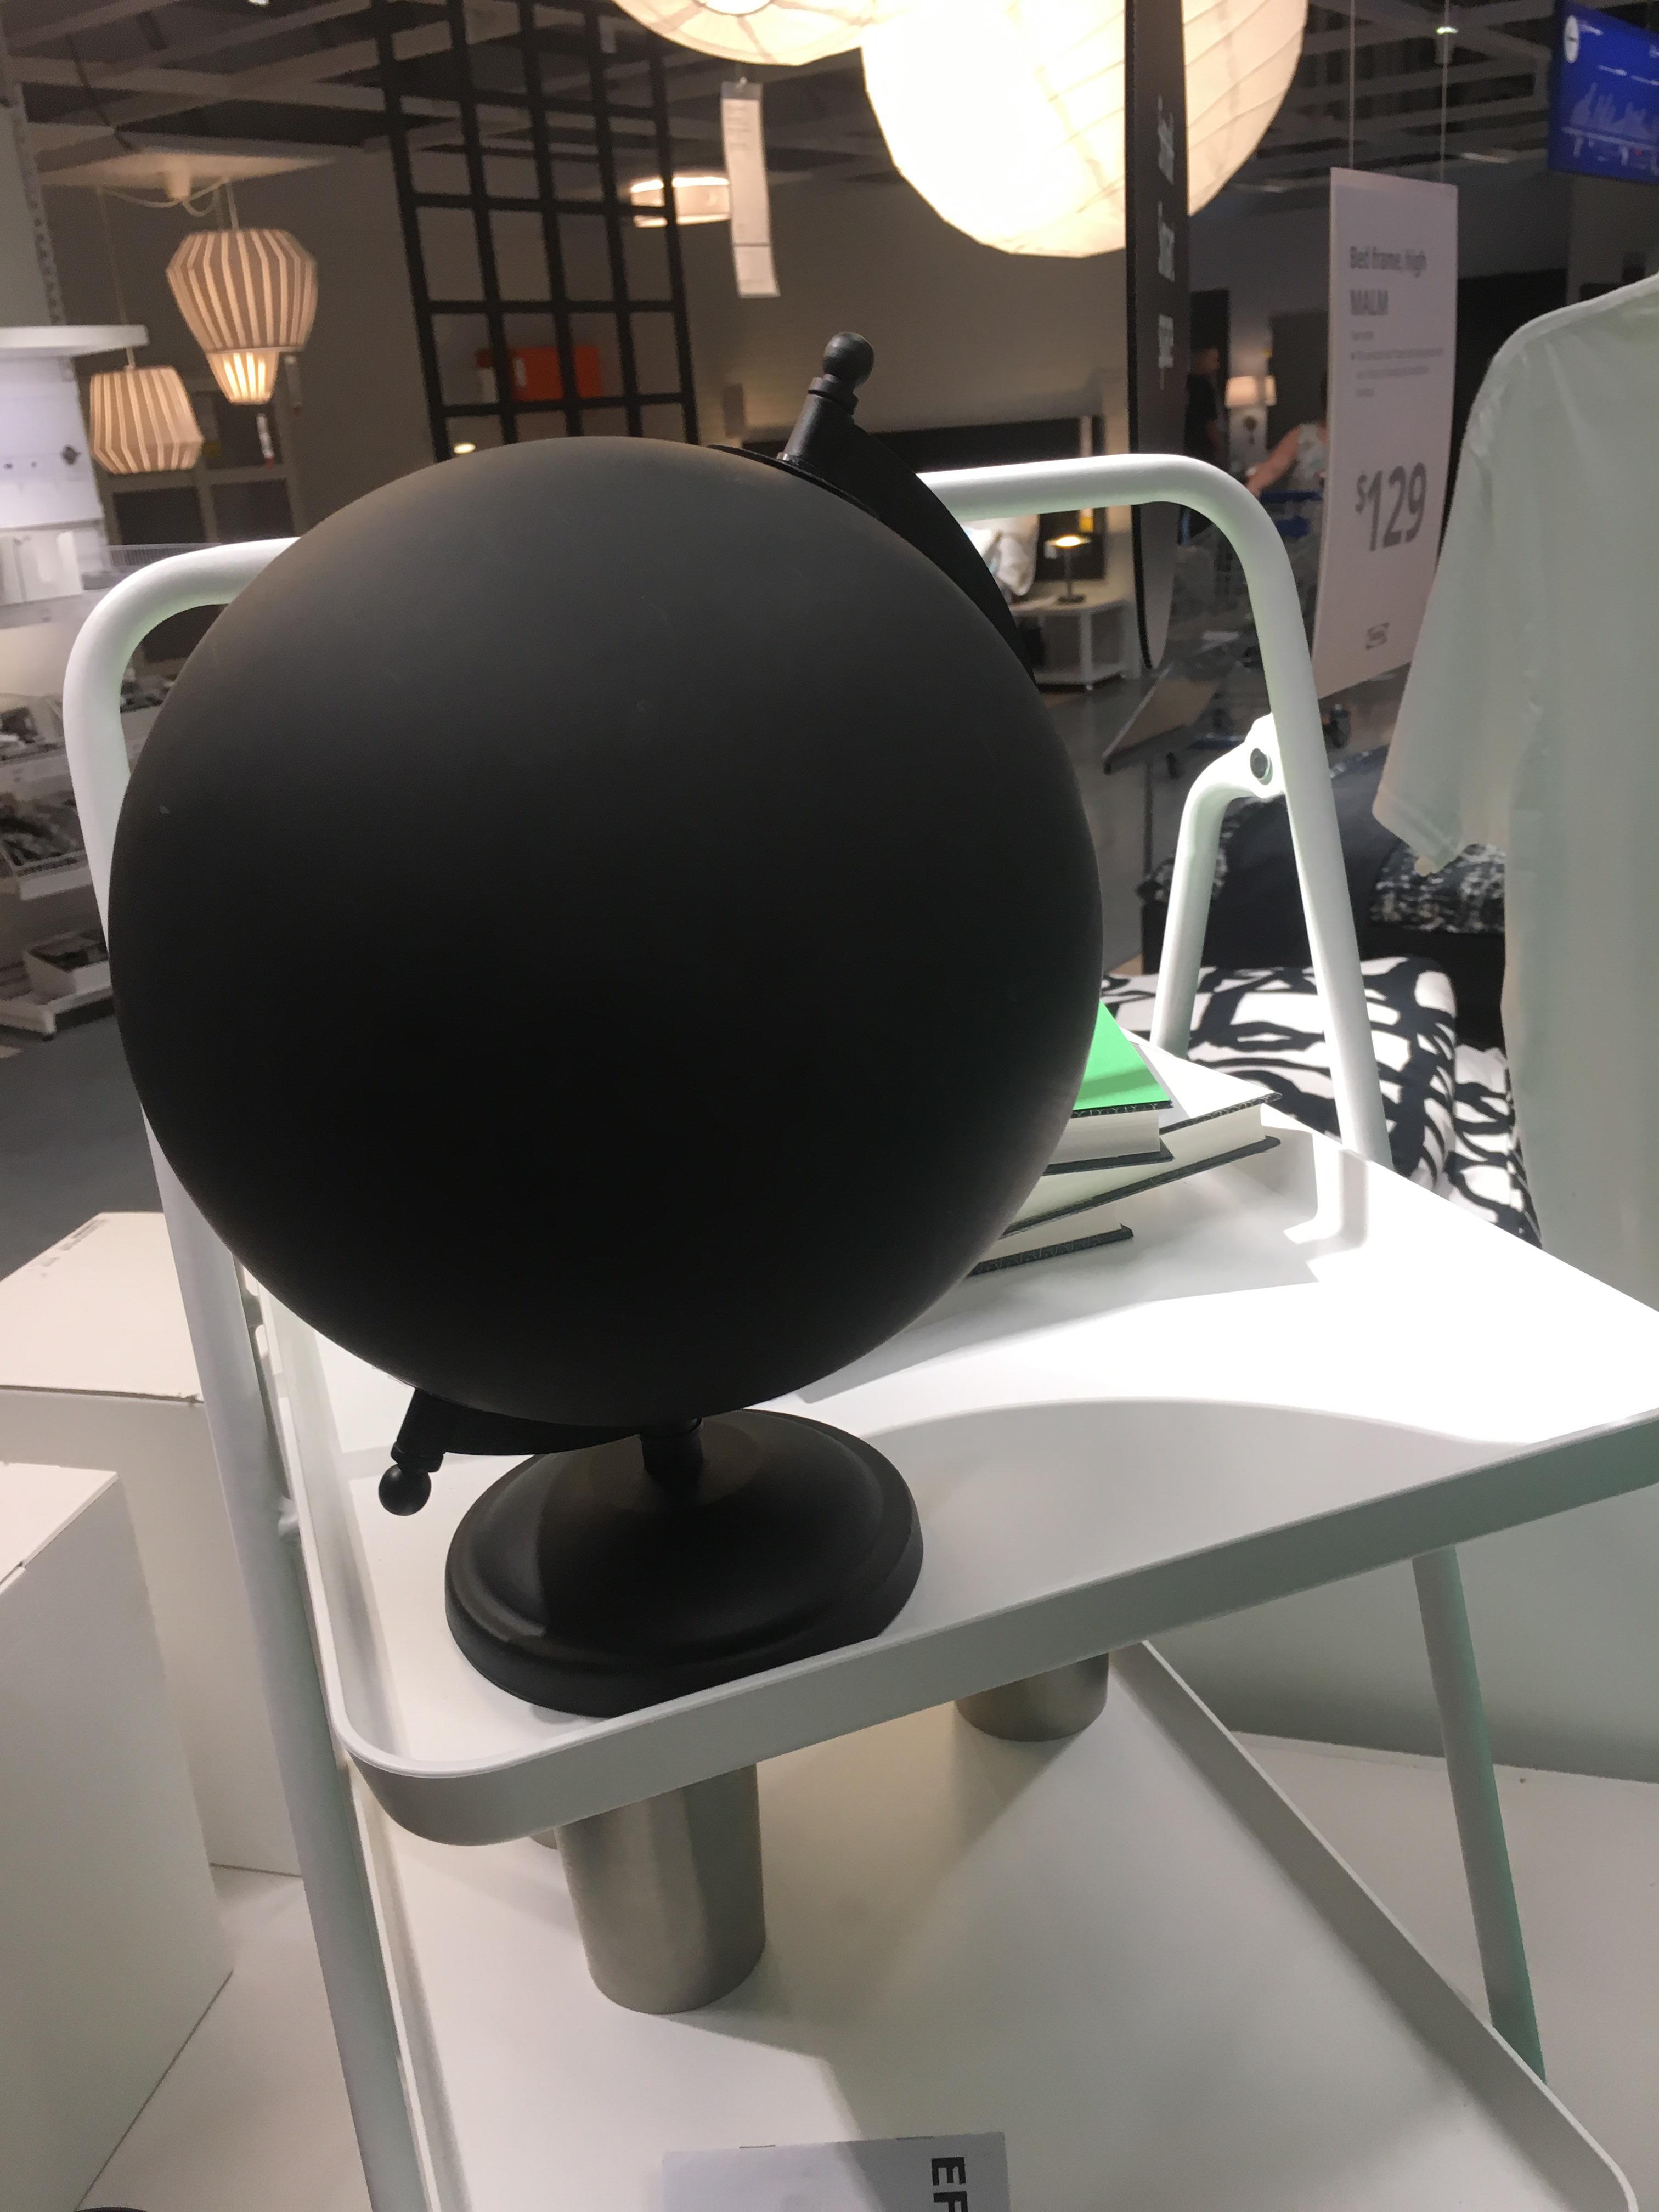 IKEA carries a globe of the Earth's surface in 2045.